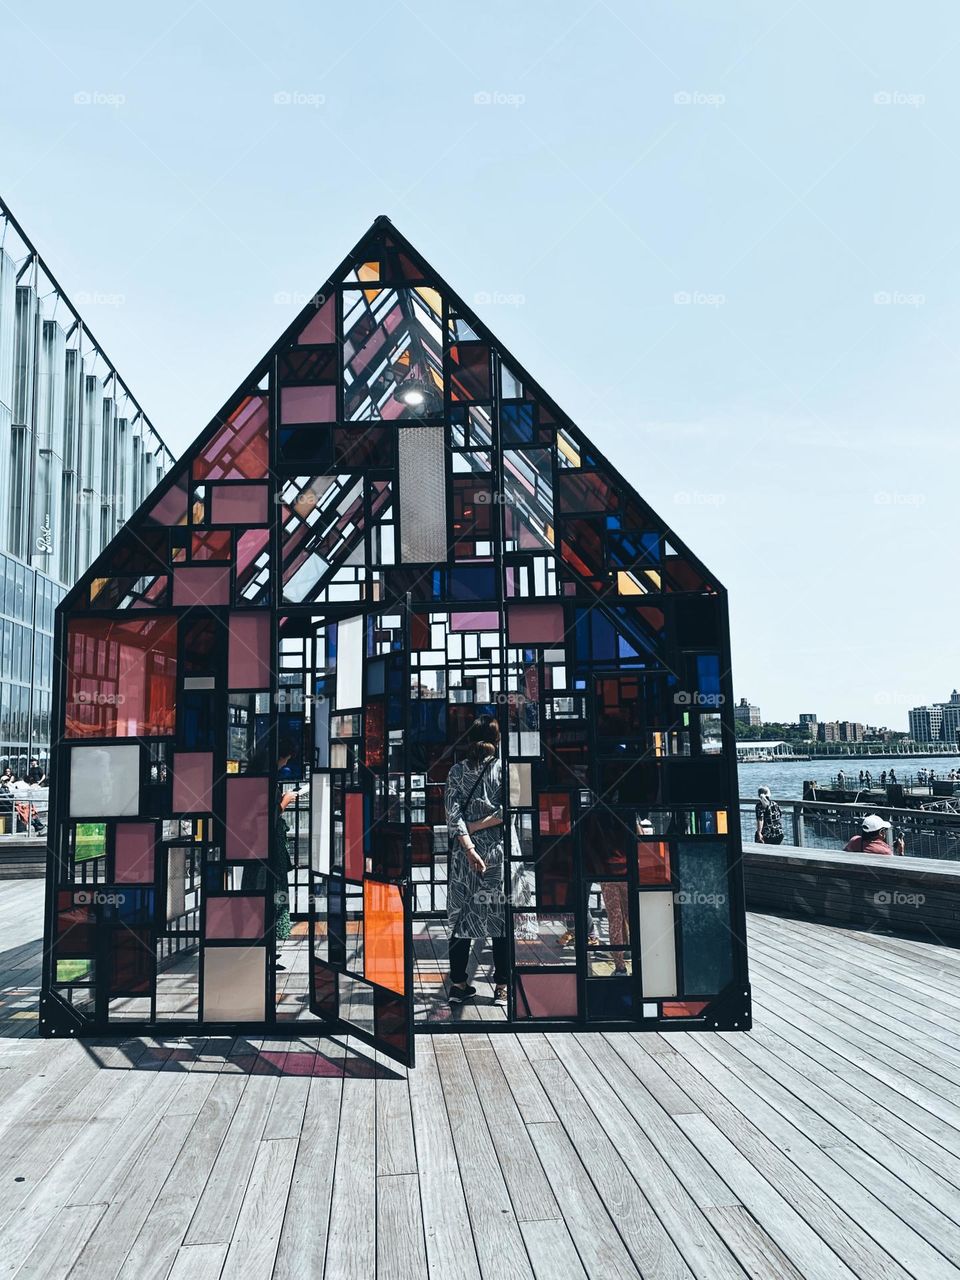 People inside the From Sea to Shining Sea by Tom Fruin - The seaport Manhattan New York.